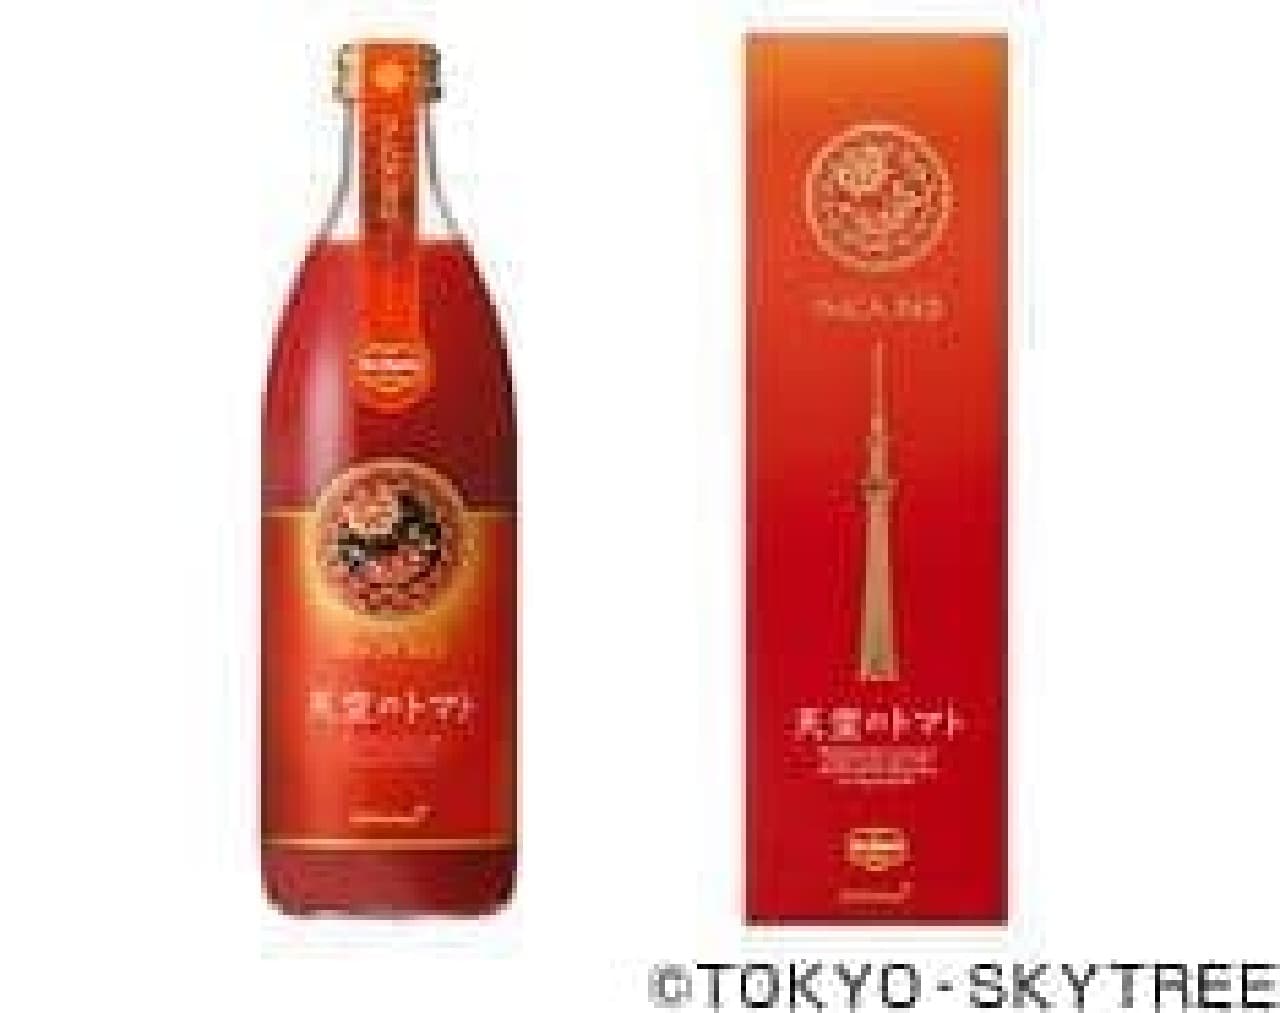 20 years in development! Tomato juice "Del Monte Sky Tomato" is on sale for a limited time at Sky Tree!